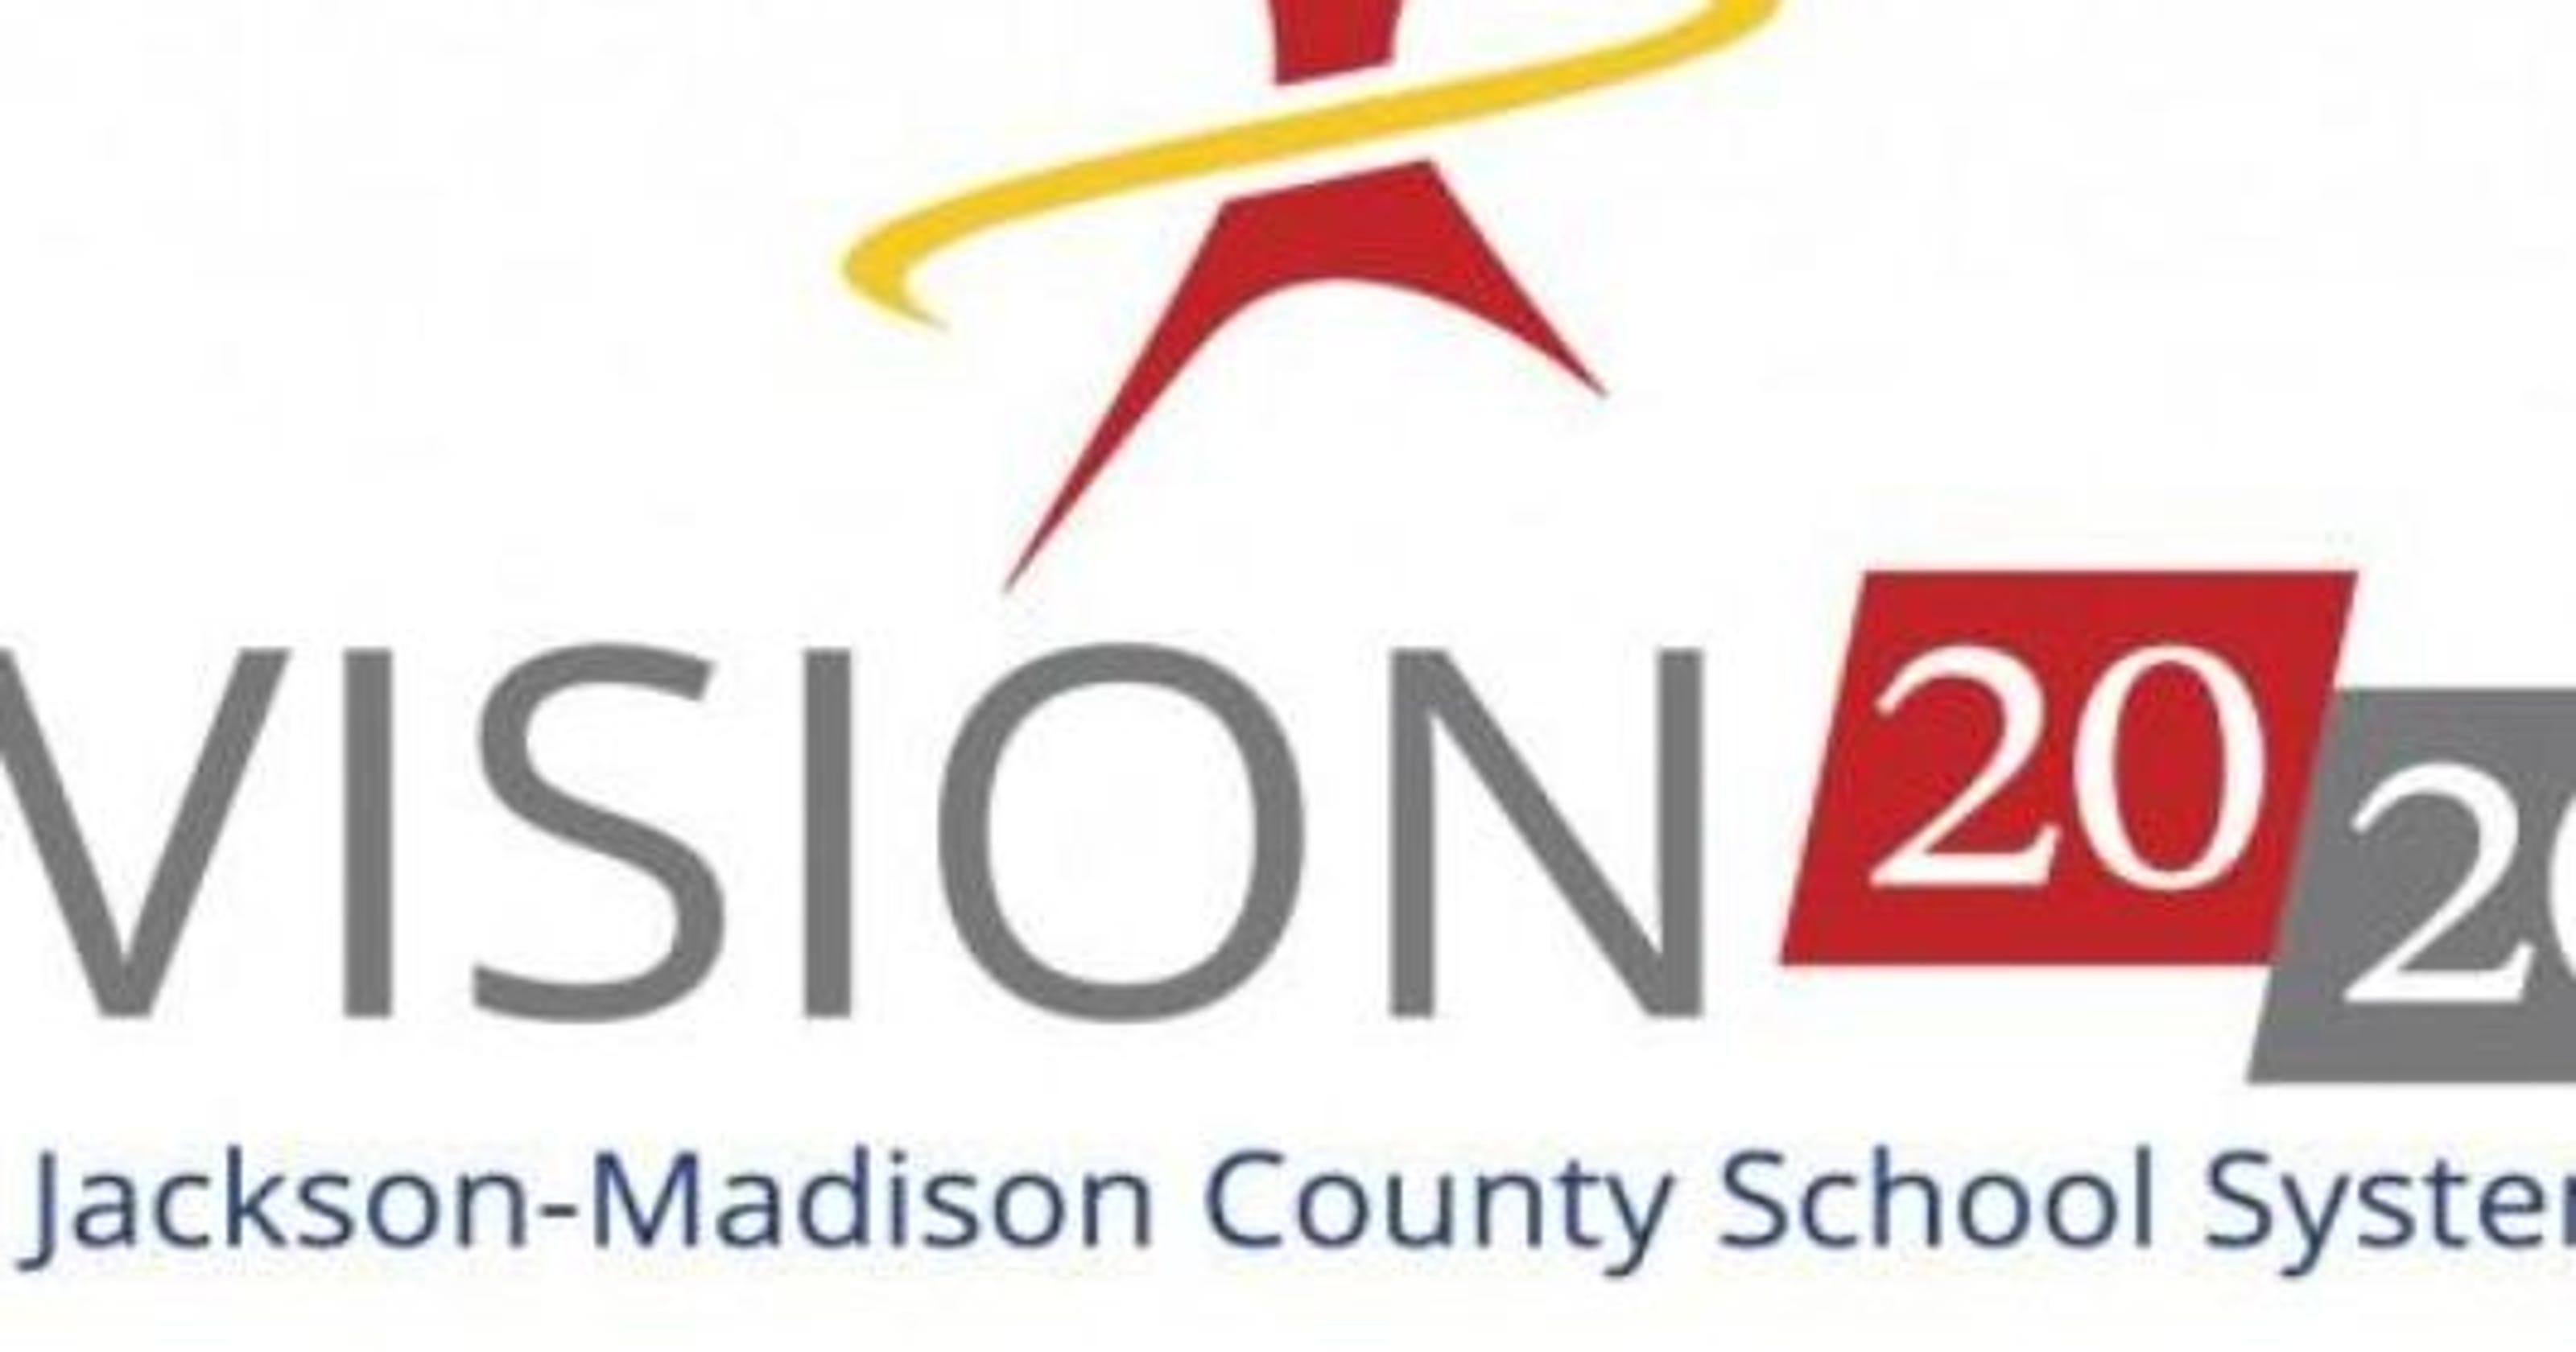 Vision 2020 update coming Tuesday